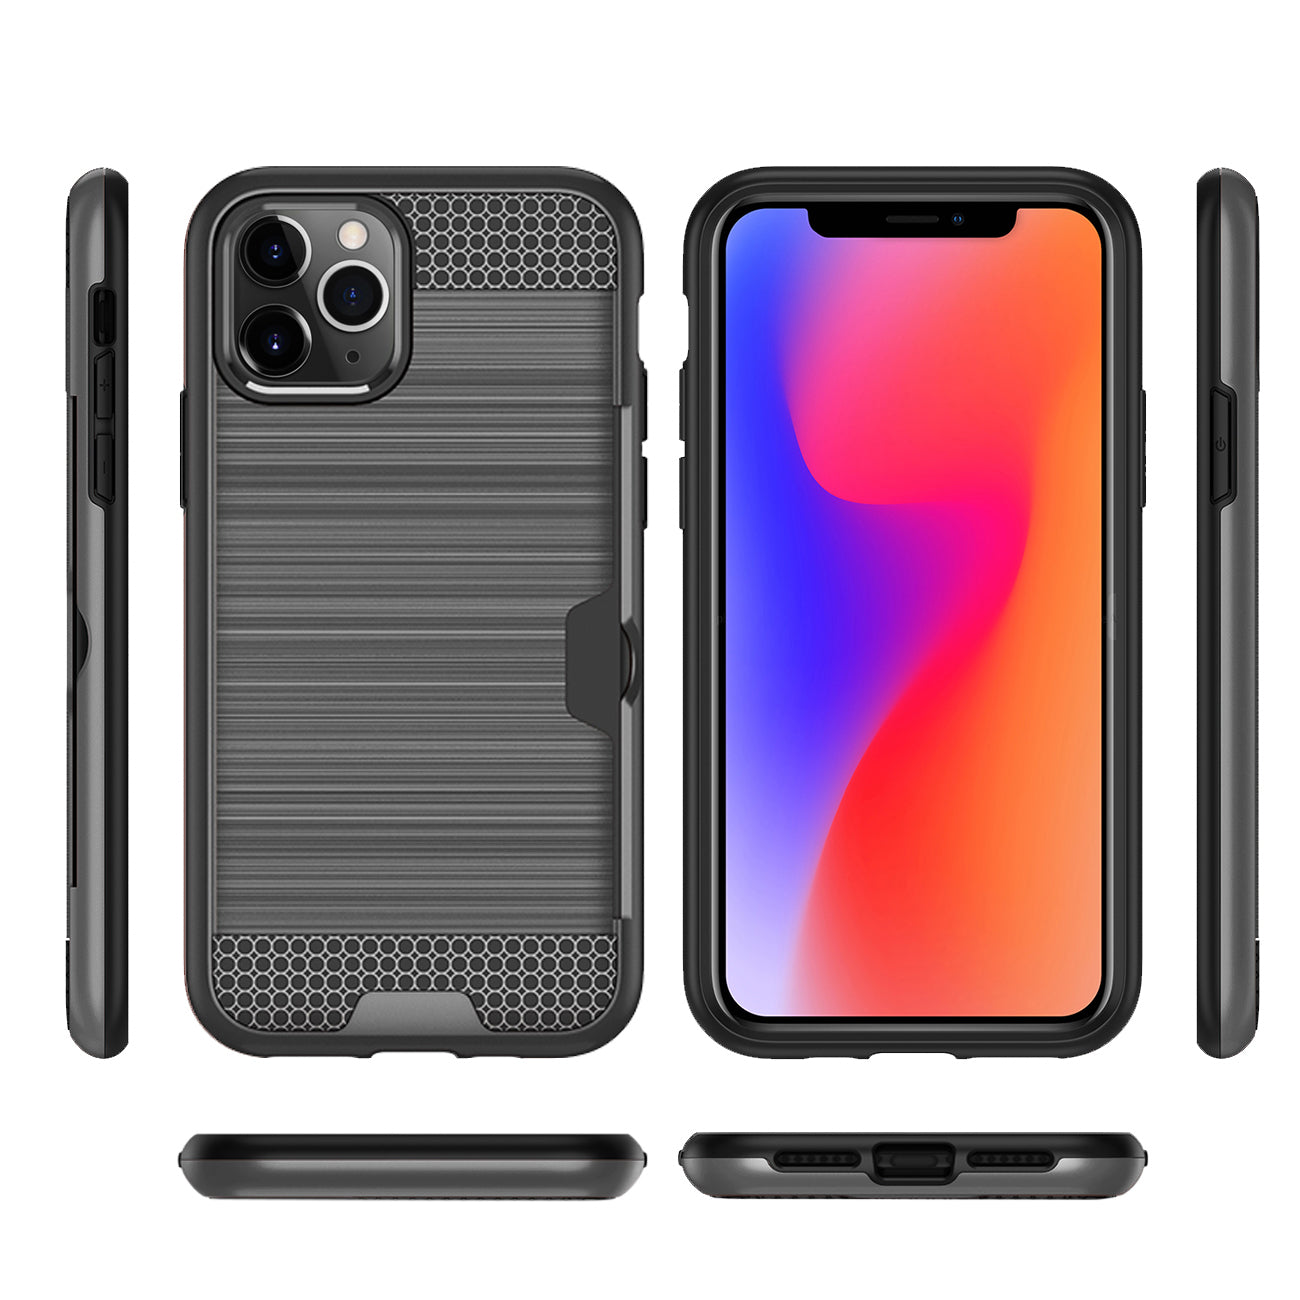 REIKO iPhone 11 PRO SLIM ARMOR HYBRID CASE WITH CARD HOLDER IN GRAY